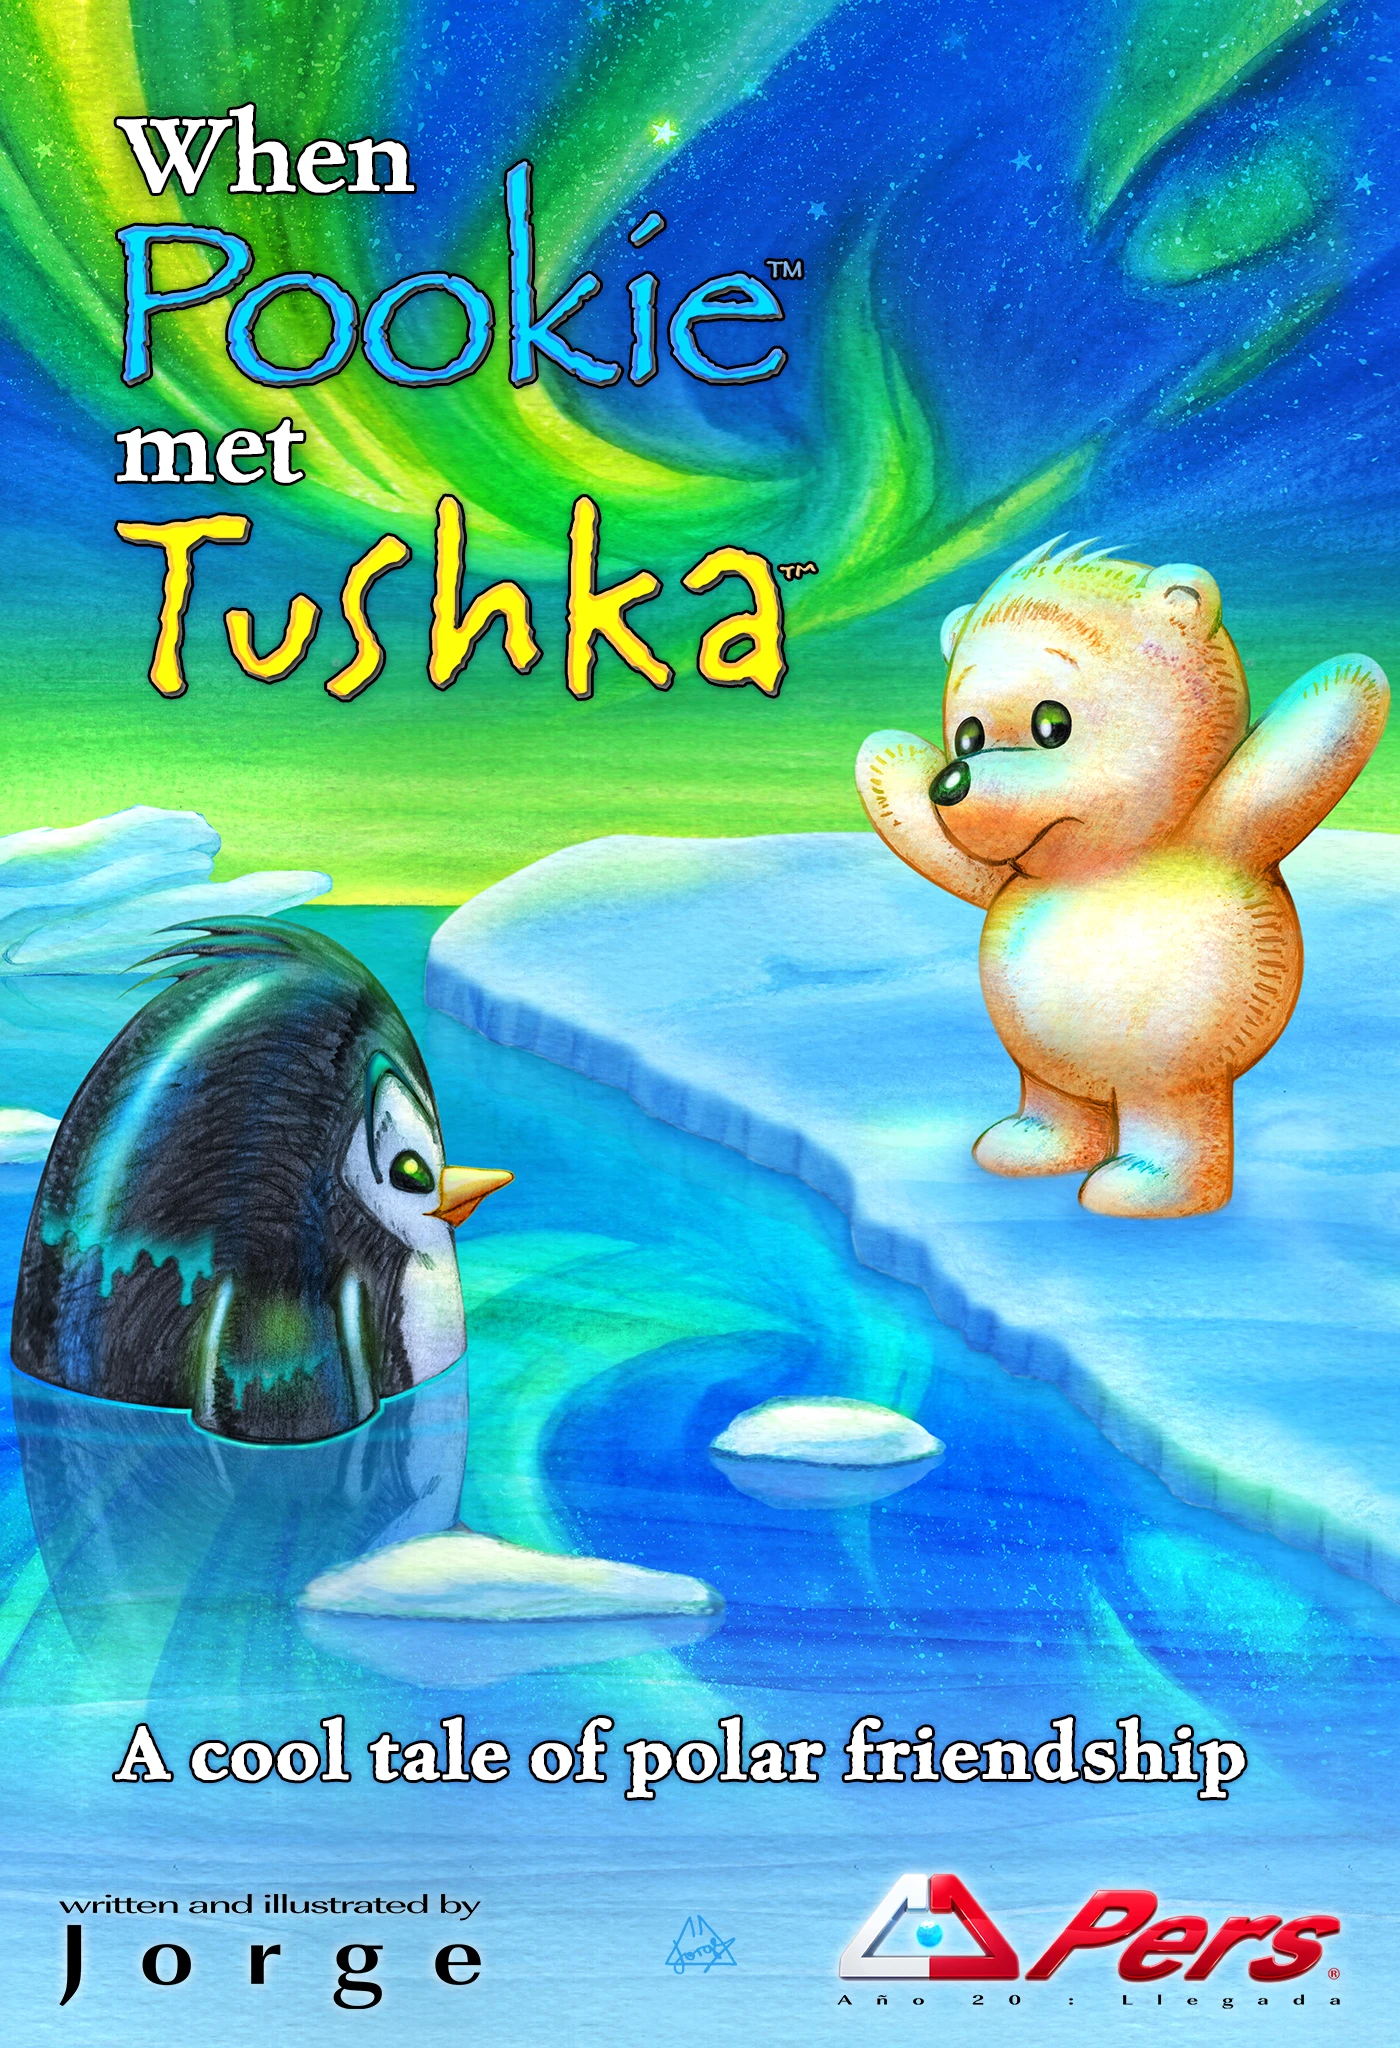 When Pookie Met Tushka: A Cool Tale of Polar Friendship